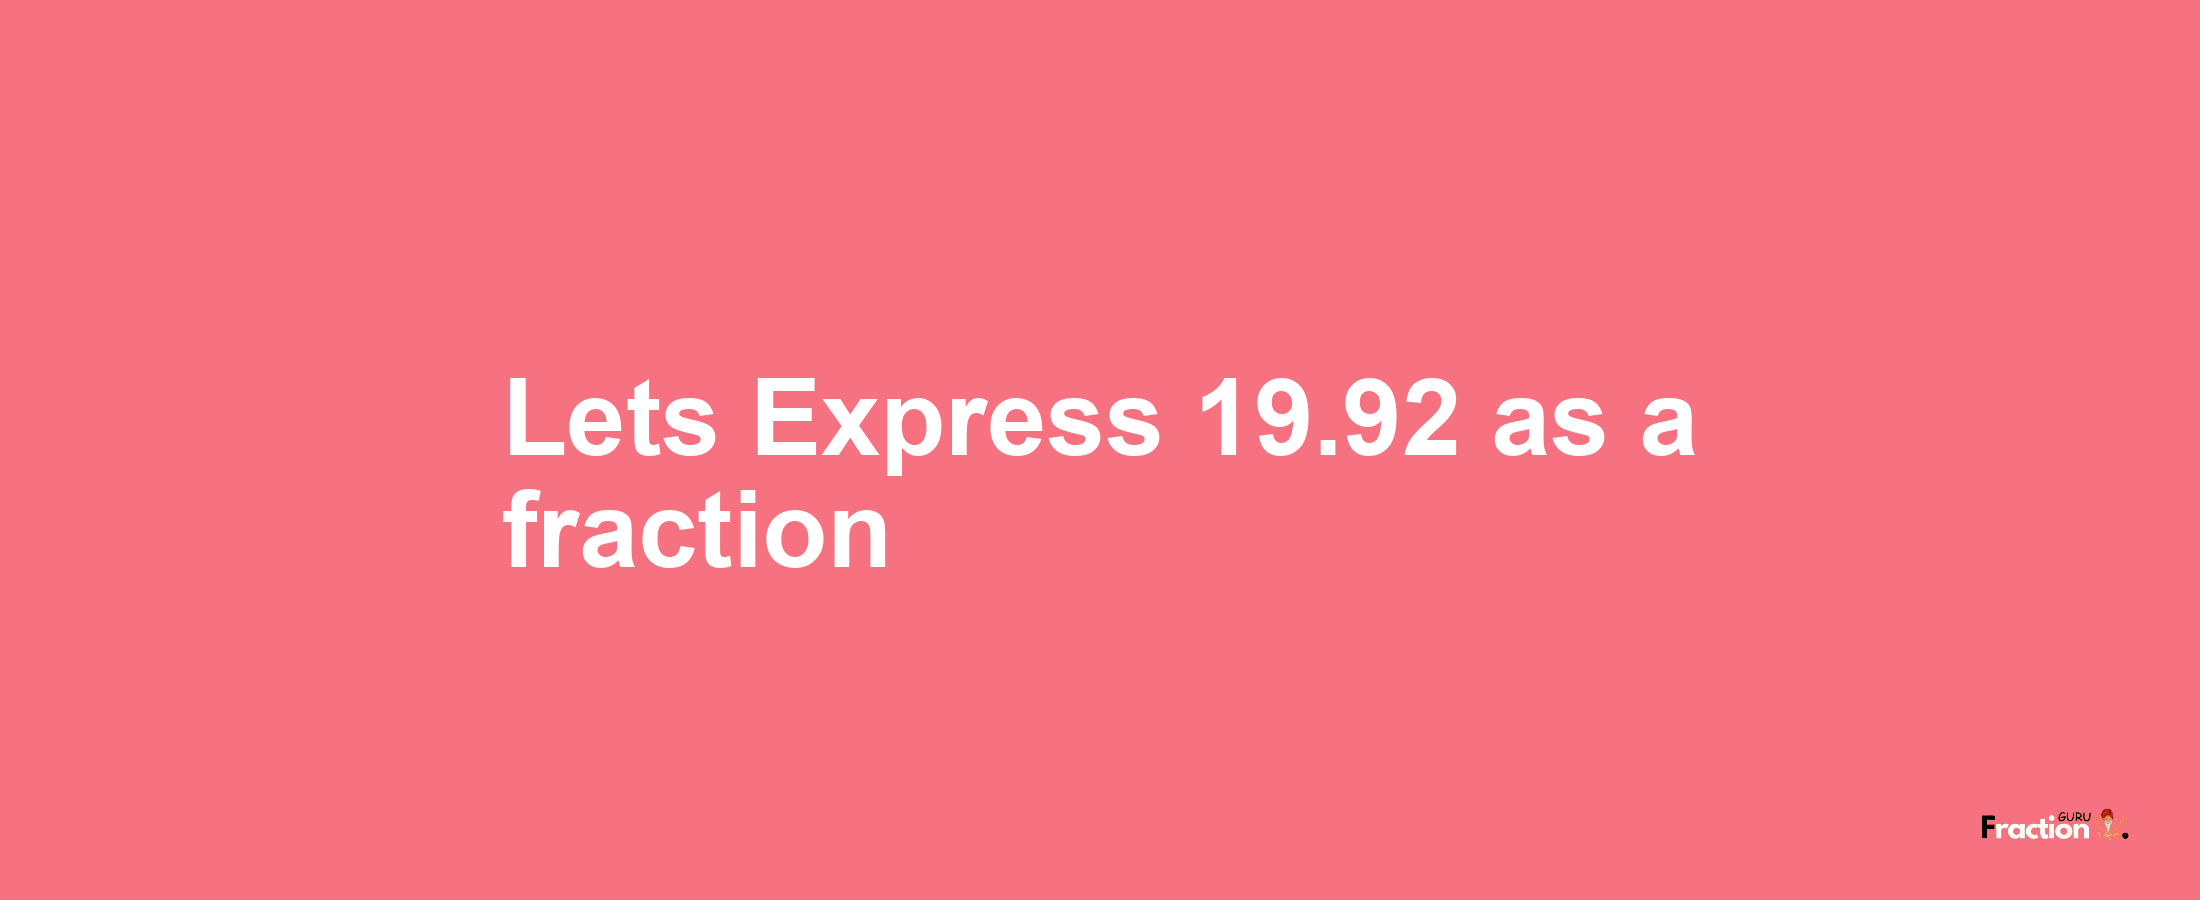 Lets Express 19.92 as afraction